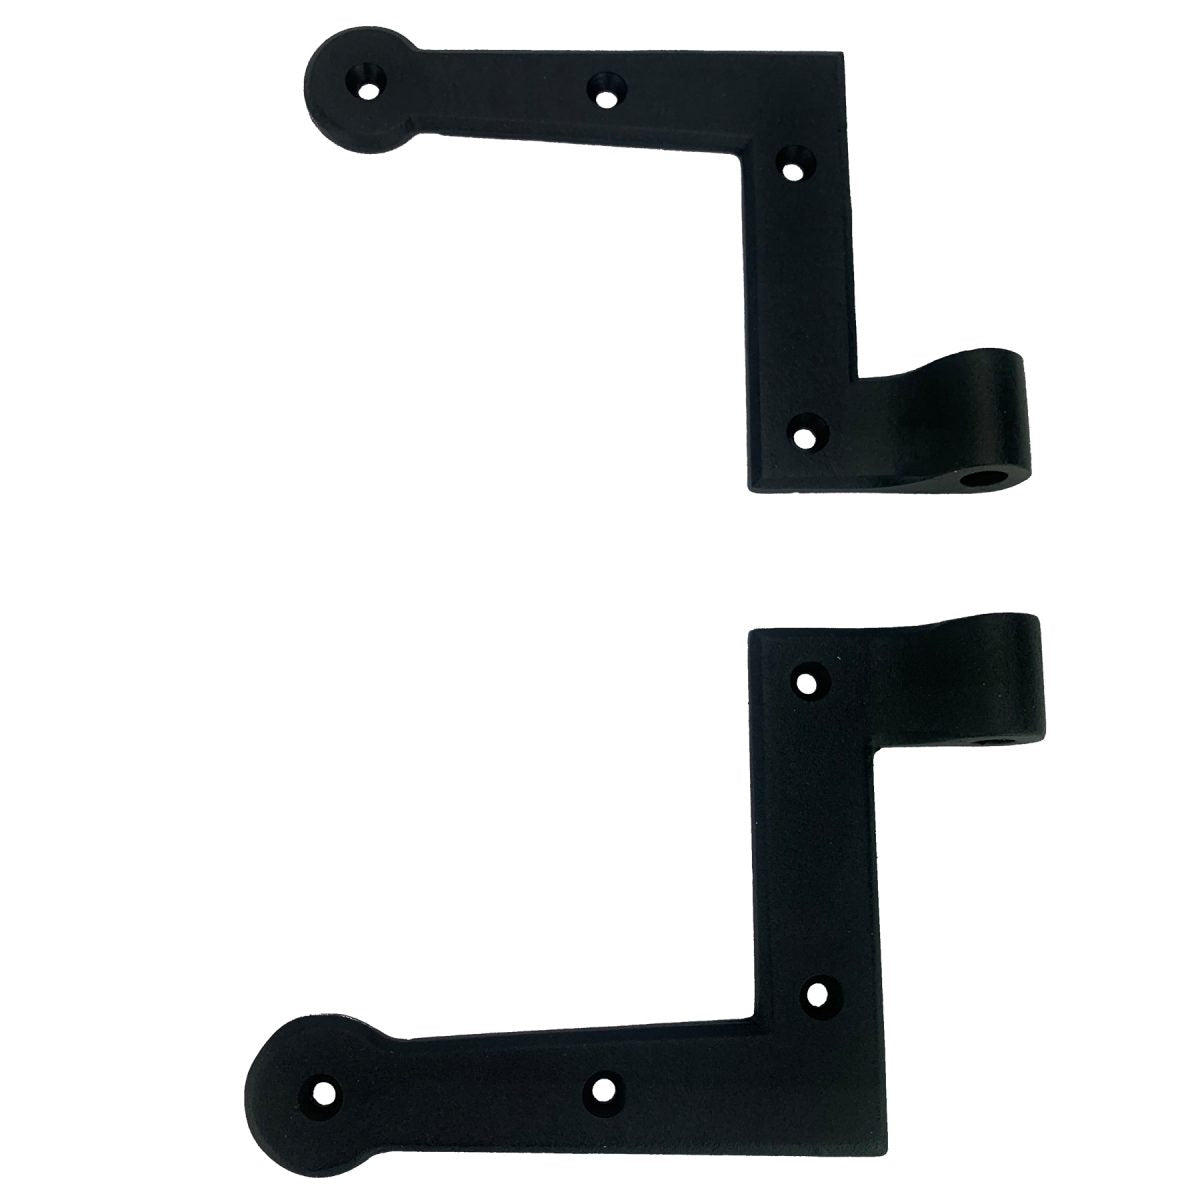 L Style Shutter Hinges - NY Style New Construction Minimal Offset - Cast Iron - Black Powder Coat - Right or Left Handing without Pintles - Sold in Pairs